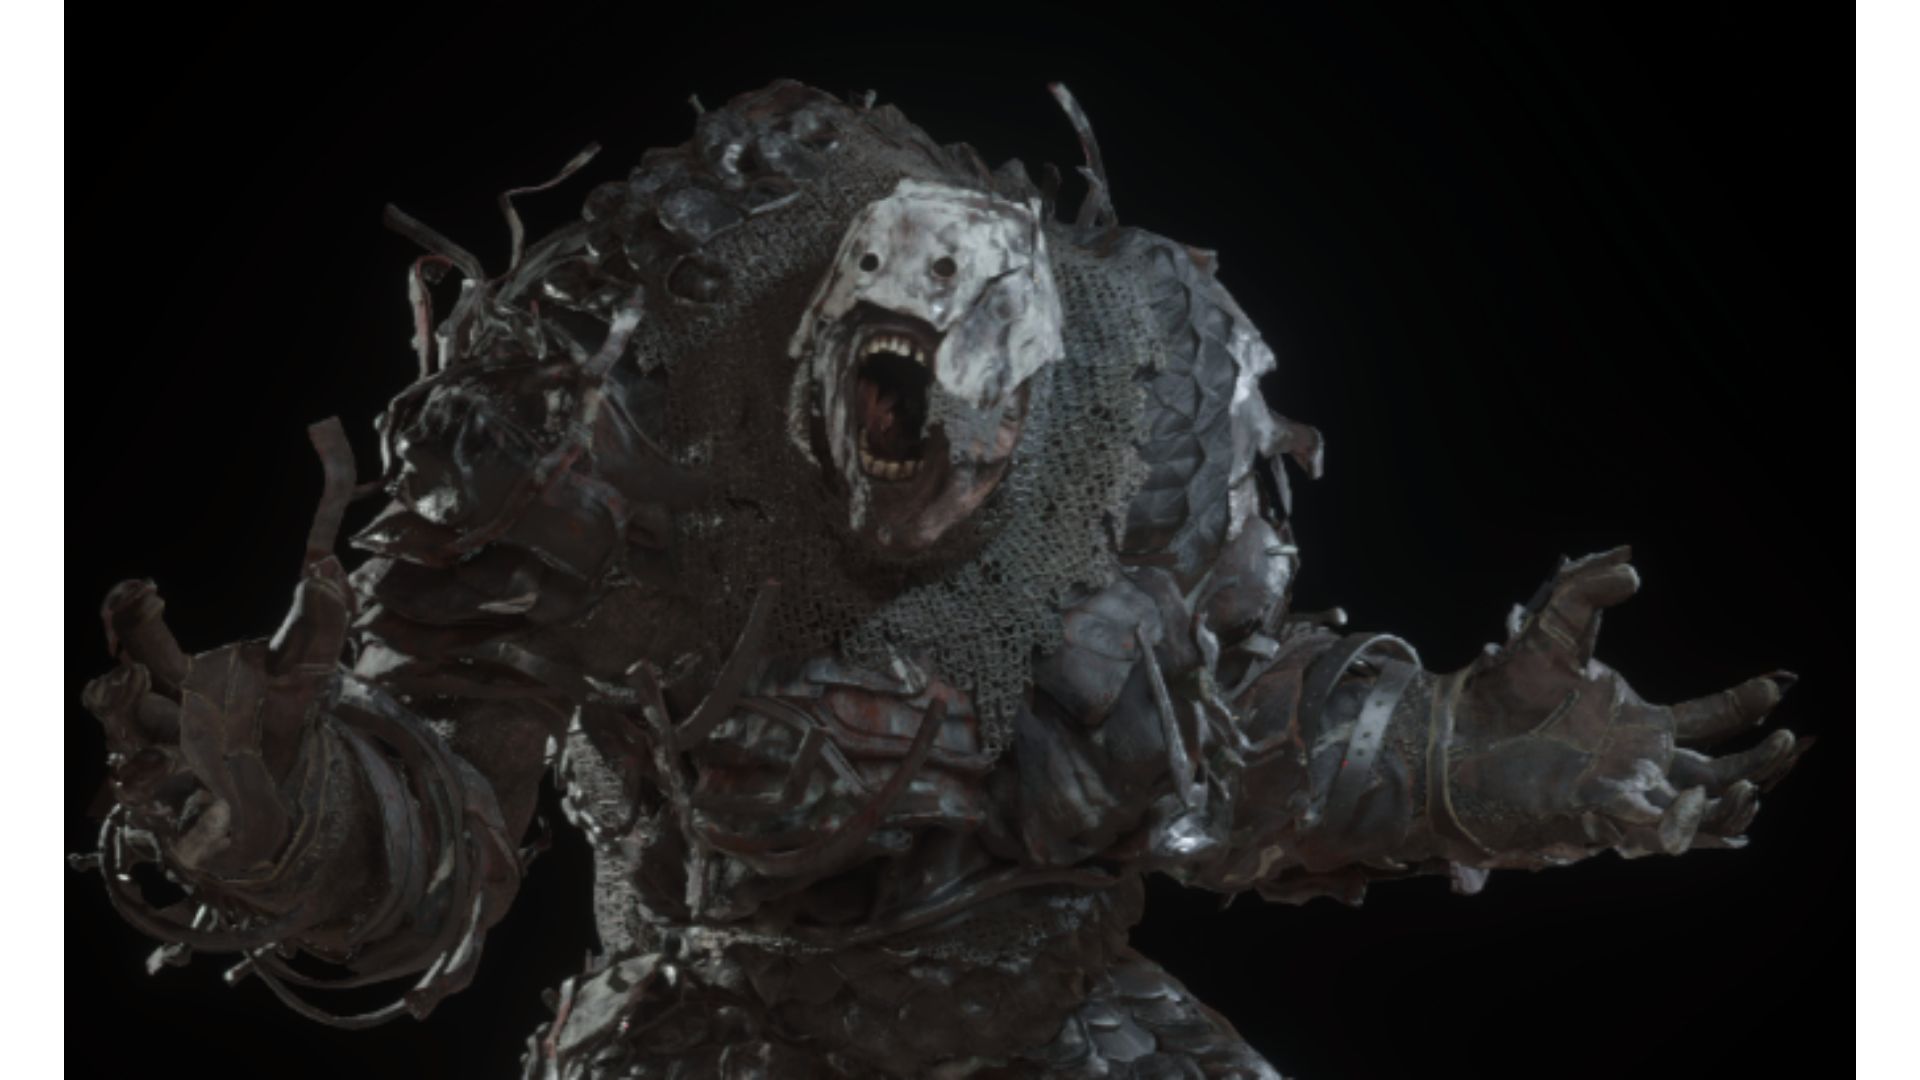 Resident Evil 4 Remake Bosses: The Armored El Gigante can be seen